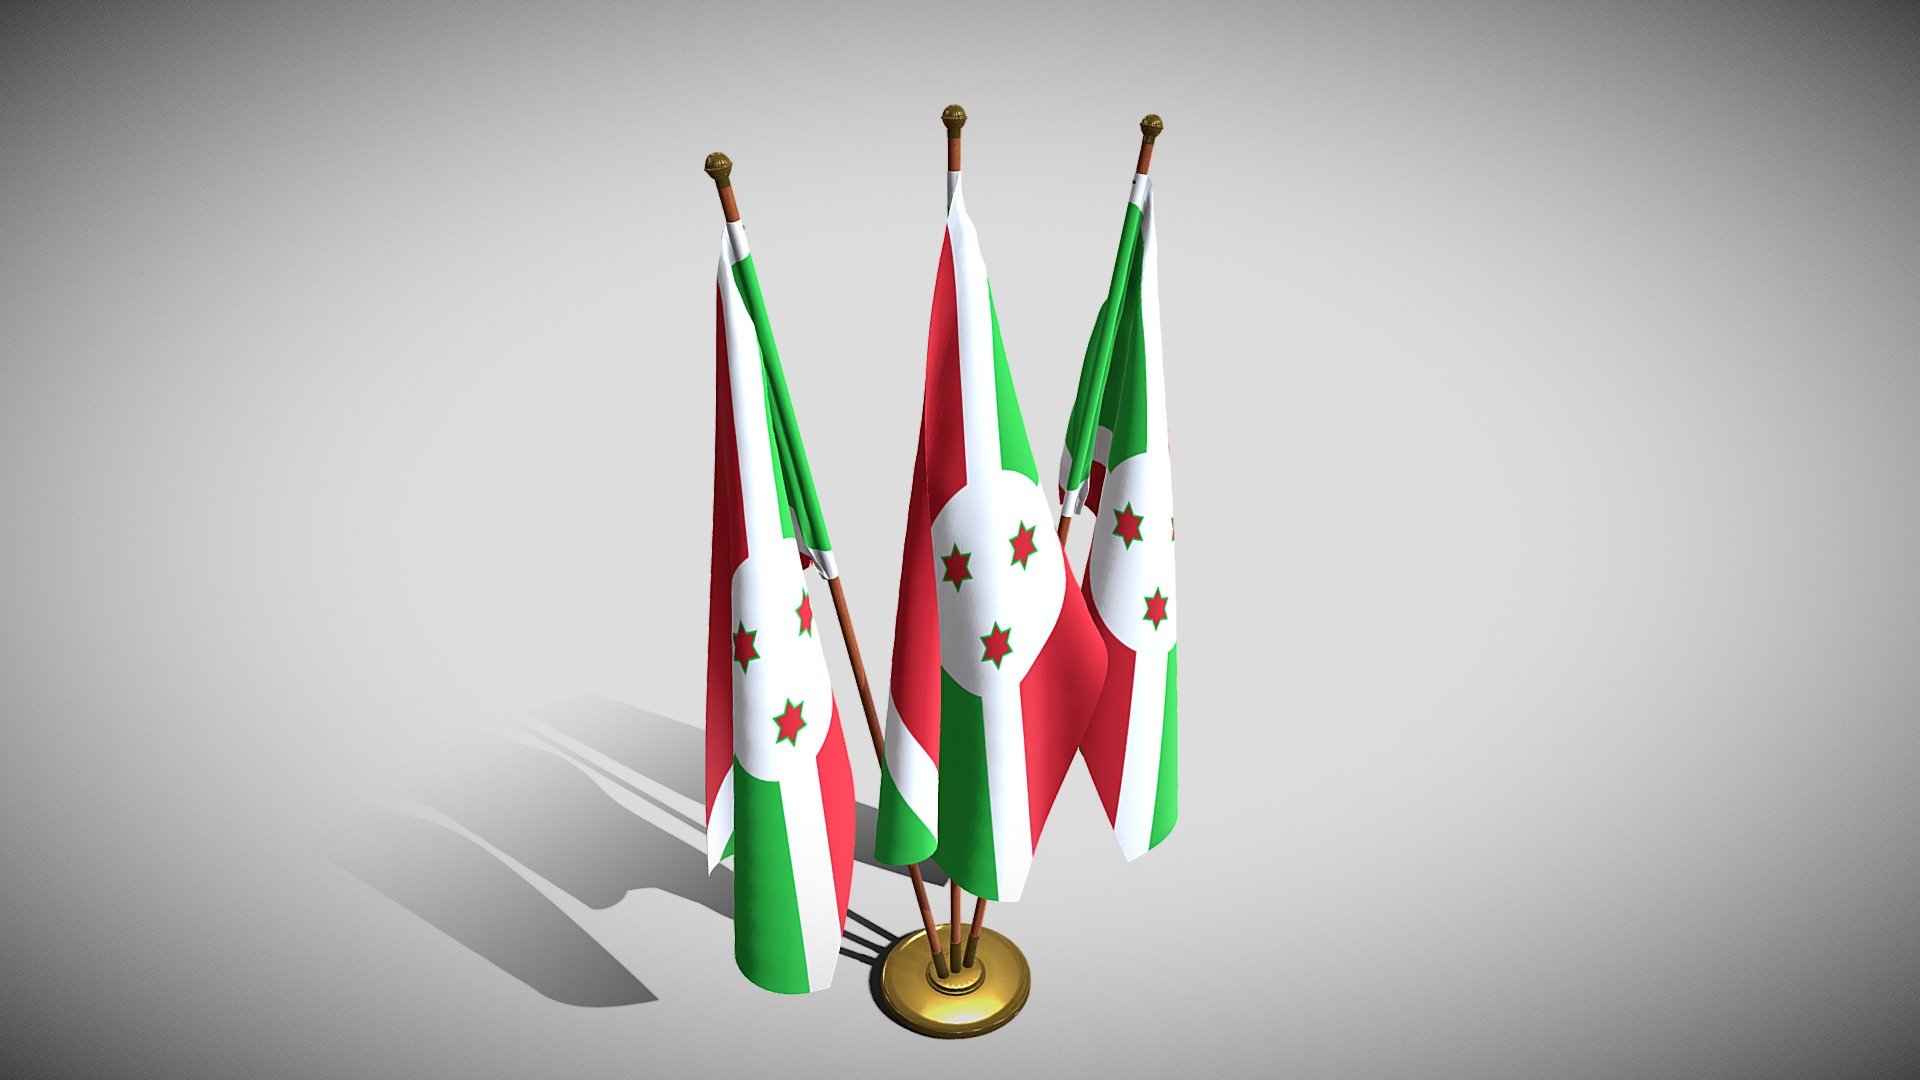 Set of four flag setups(exterior flag and three different office flags).

File formats:
-.blend, rendered with cycles, as seen in the images;
-.obj, with materials applied and textures;
-.dae, with materials applied and textures;
-.fbx, with material slots applied;
-.stl;

3D Software:
This 3d model was originally created in Blender 2.79 and rendered with Cycles.

Materials and textures:
The model has materials applied in all formats, and is ready to import and render .
The model comes with multiple png image textures.

Preview scenes:
The preview images are rendered in Blender using its built-in render engine &lsquo;Cycles'.
Note that the blend files come directly with the rendering scene included and the render command will generate the exact result as seen in previews.
The flags are on different layer each for convenience.
For each format there are separate files for each of the four flag setups 3d model